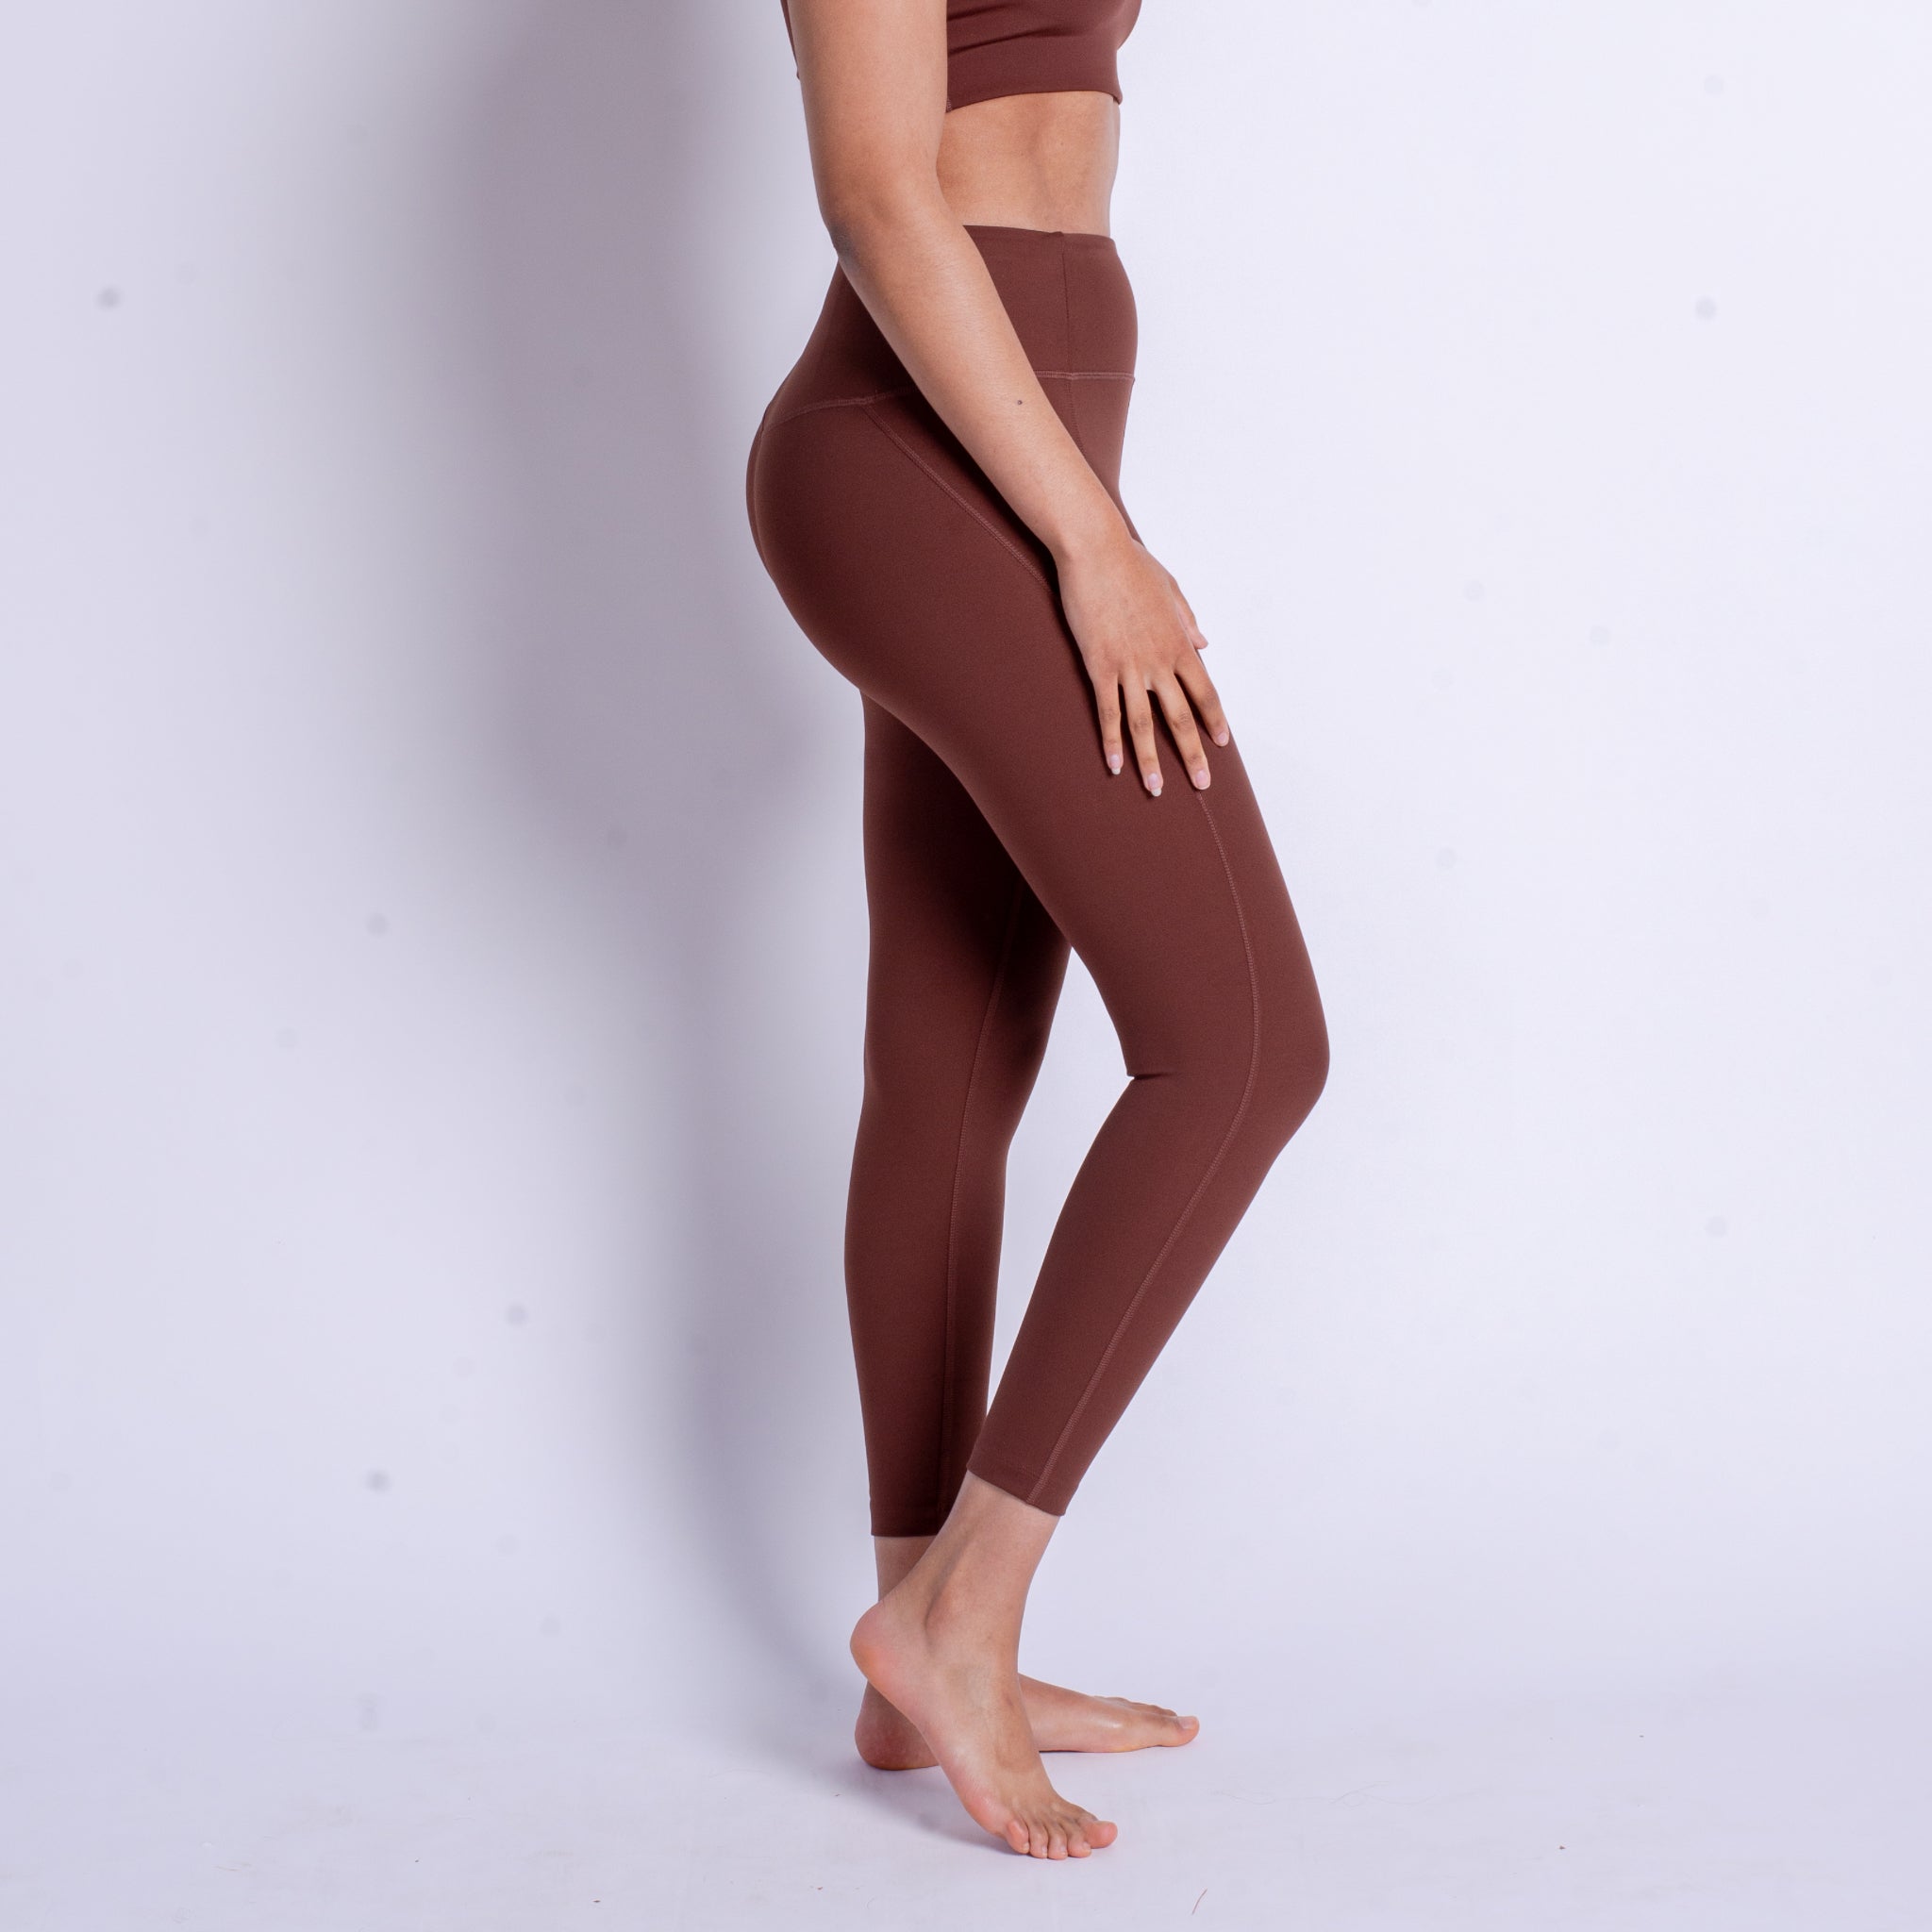 Girlfriend Collective Leggings "Compressive High-Rise" long